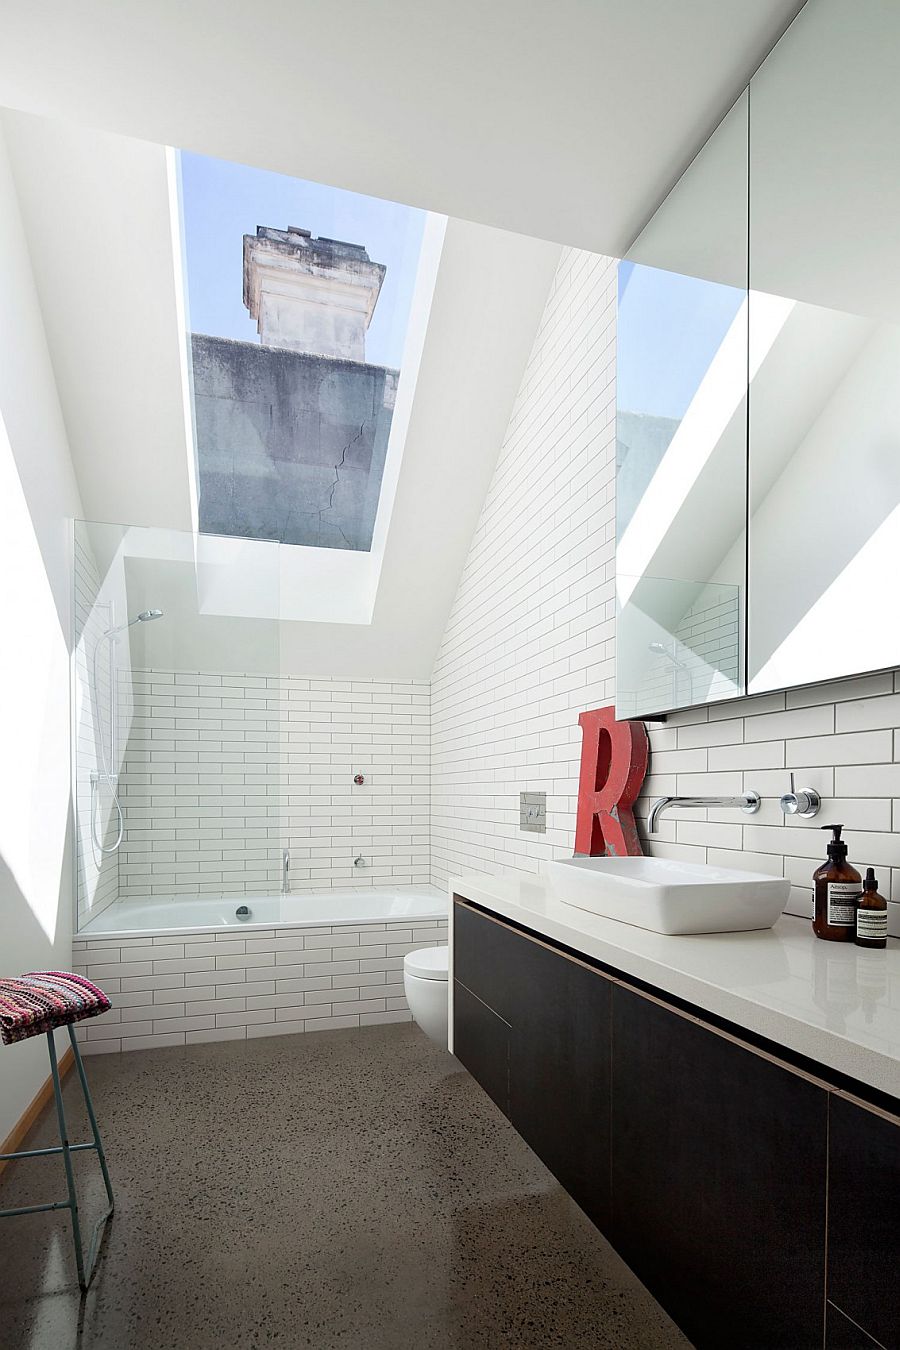 Skylight above the bathroom in white